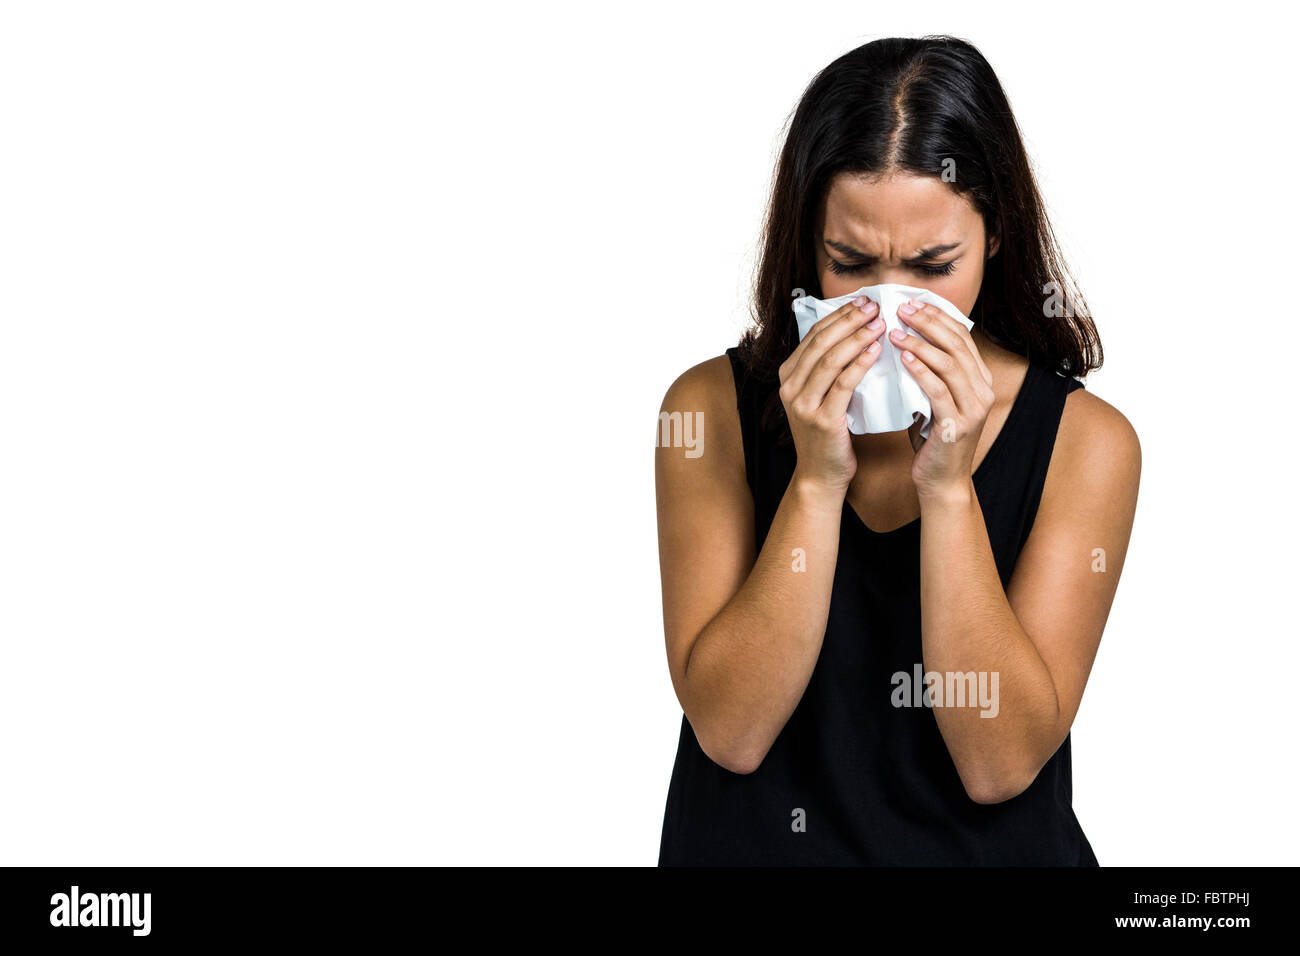 Unhappy woman blowing nose Stock Photo